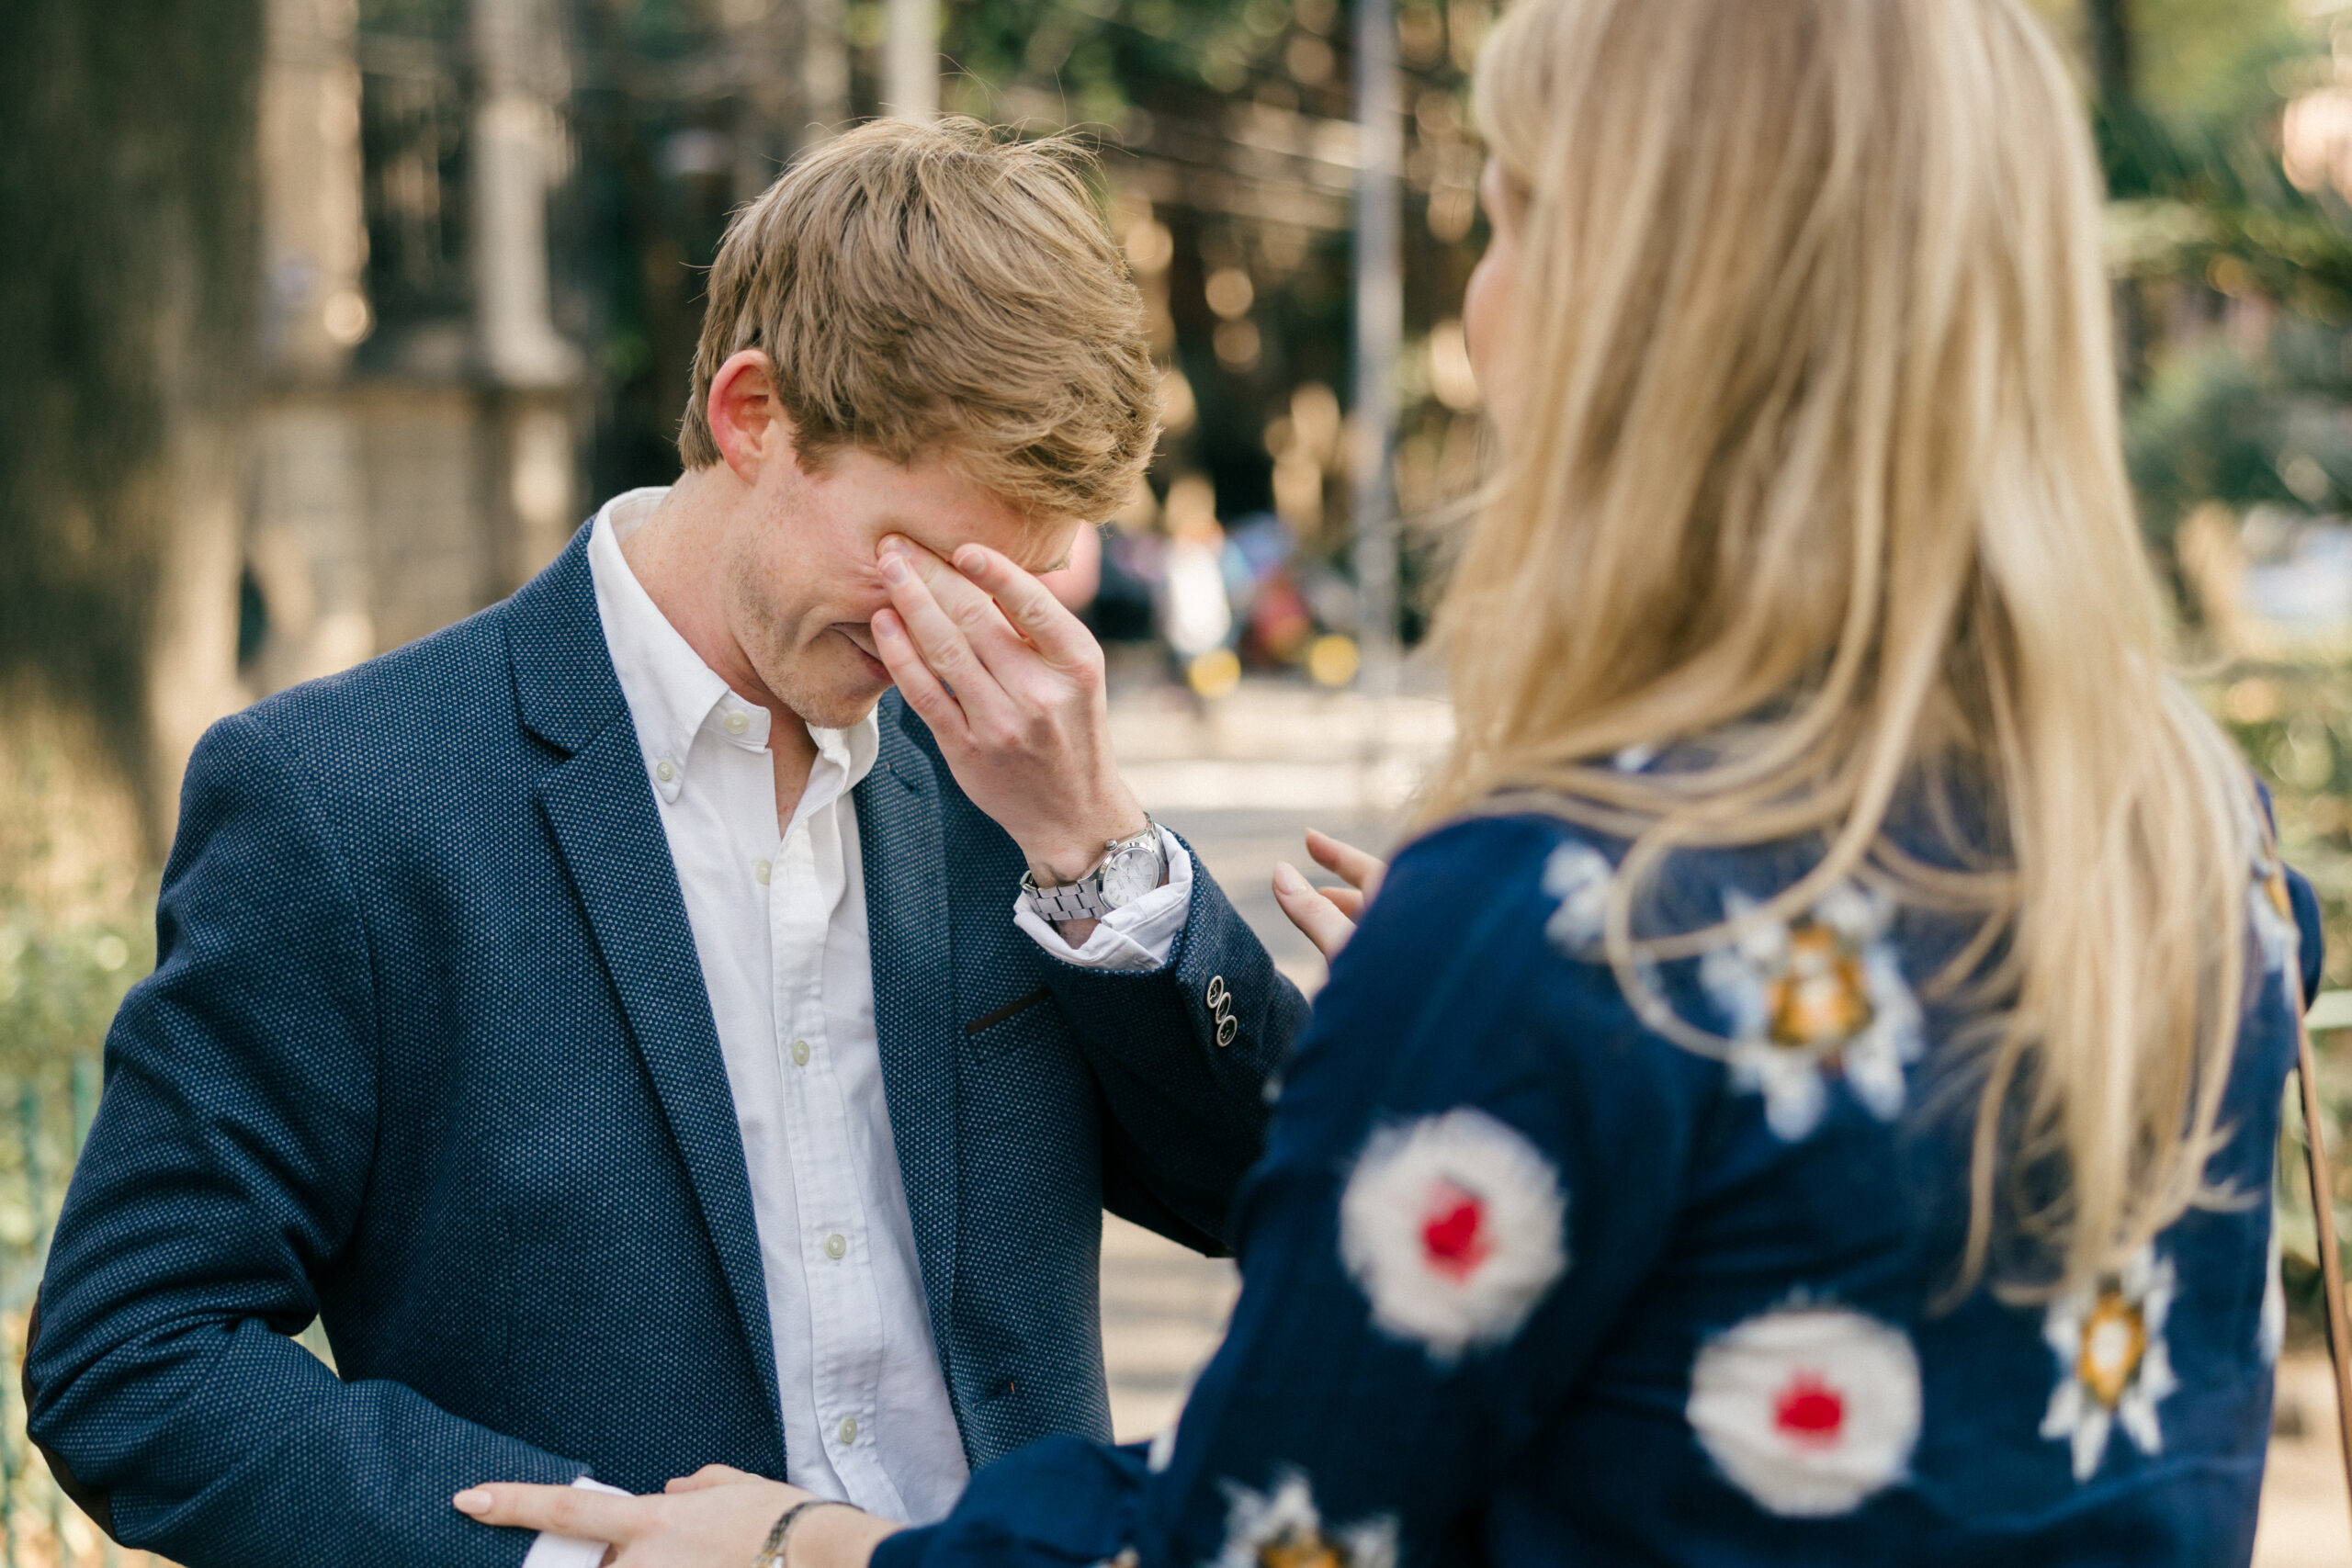 New fiance sheds a tear during their surprise Mexico city proposal